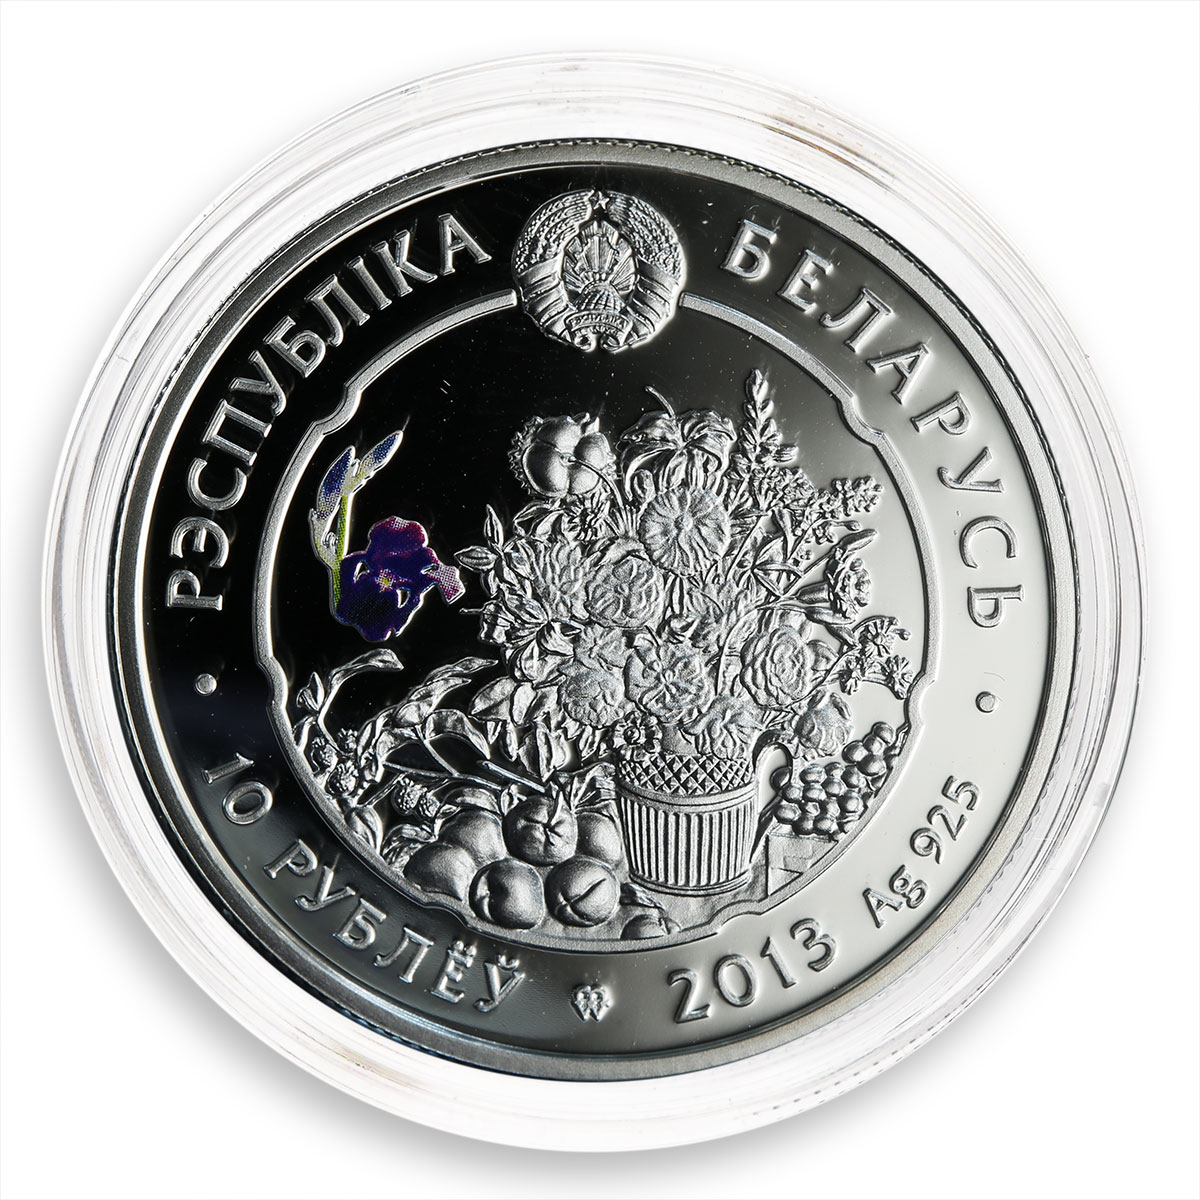 Belarus 10 Roubles Series Beauty of Flowers Carnation Flora Proof coin 2013